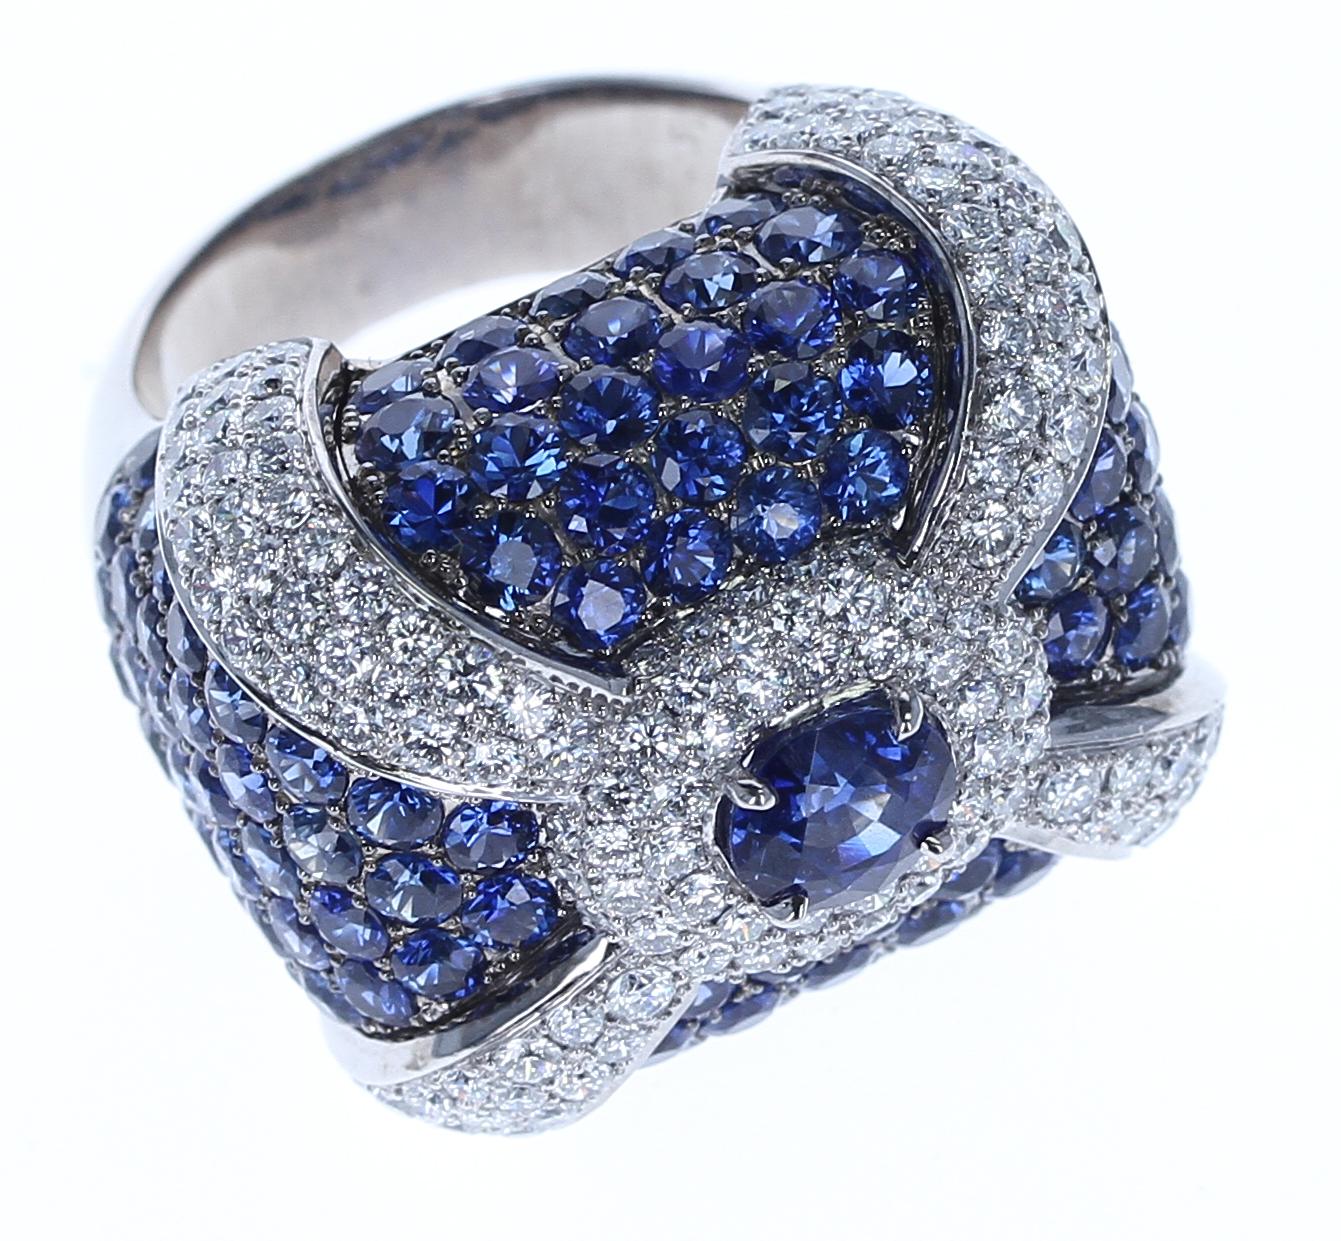 An approximate 1.27 Carat Center Sapphire Cocktail Ring with Pave Sapphires and Diamonds, 18K White Gold. 
Accent Sapphires Weight: 9.10 carats
Total Weight: 23.56 grams
Signed LEVIEV.